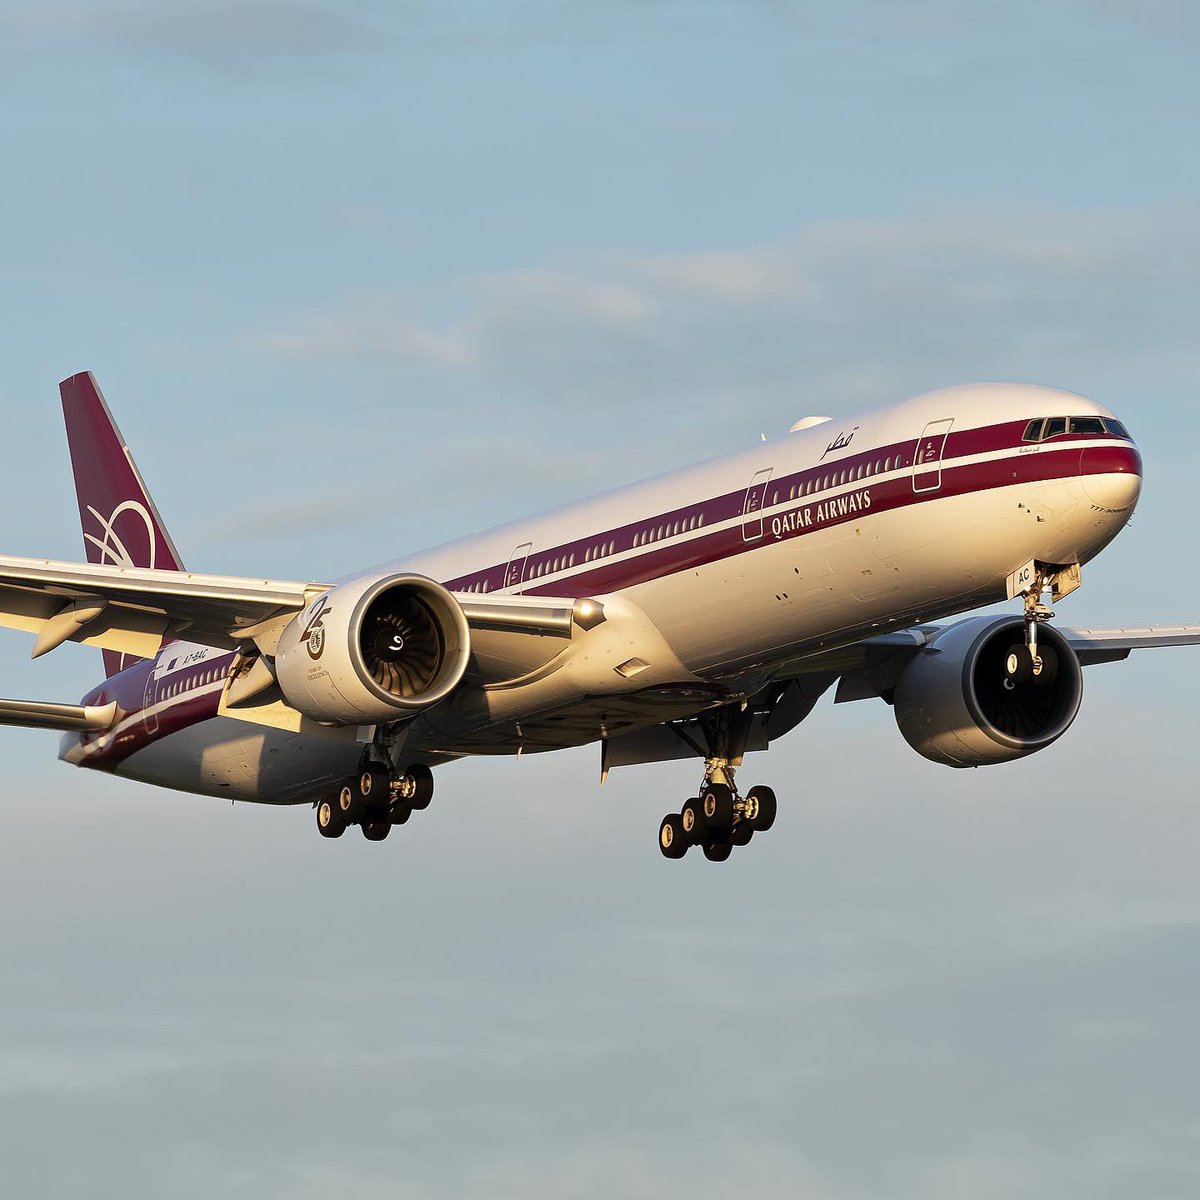 The Qatar Airways Retro on the Boeing 77W! What a stunner of a catch to get in London and with lusciously golden sunlight too! #aviation #qatarairways #boeing #boeing777 #aviationphotography #avgeek #LHR